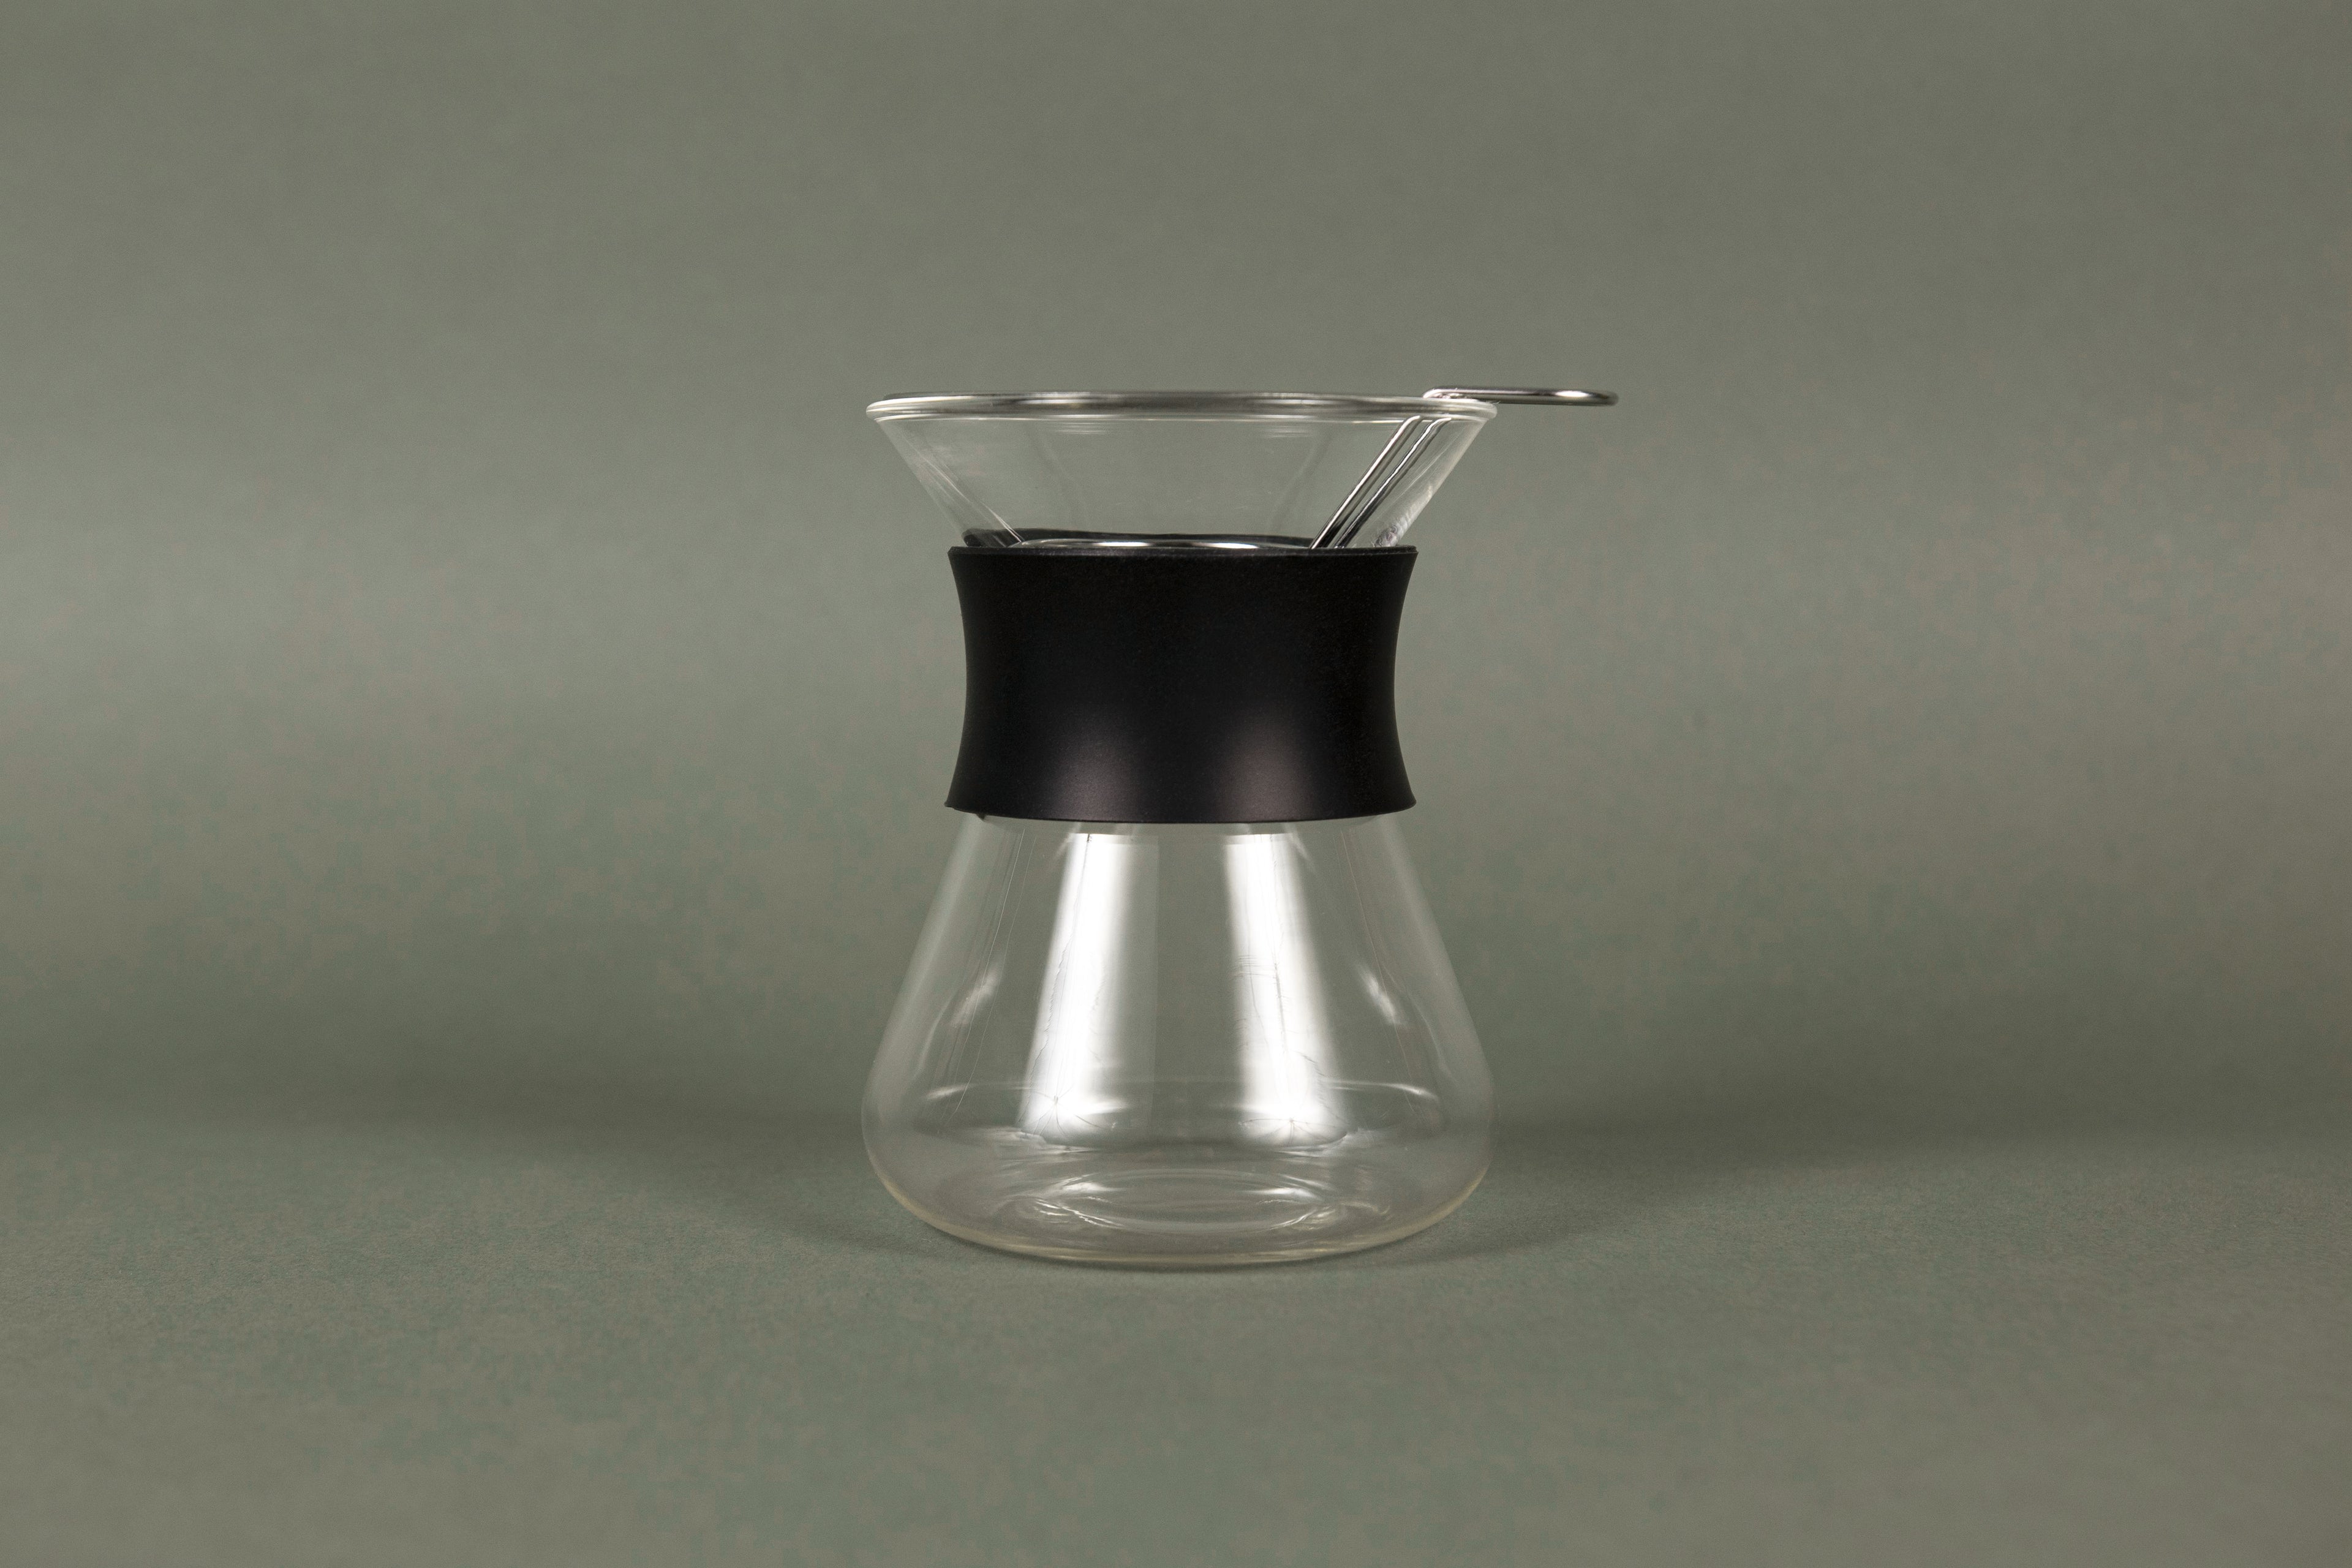 Hourglass shaped glass server with stainless steel wire dripper and black silicone rubber band.